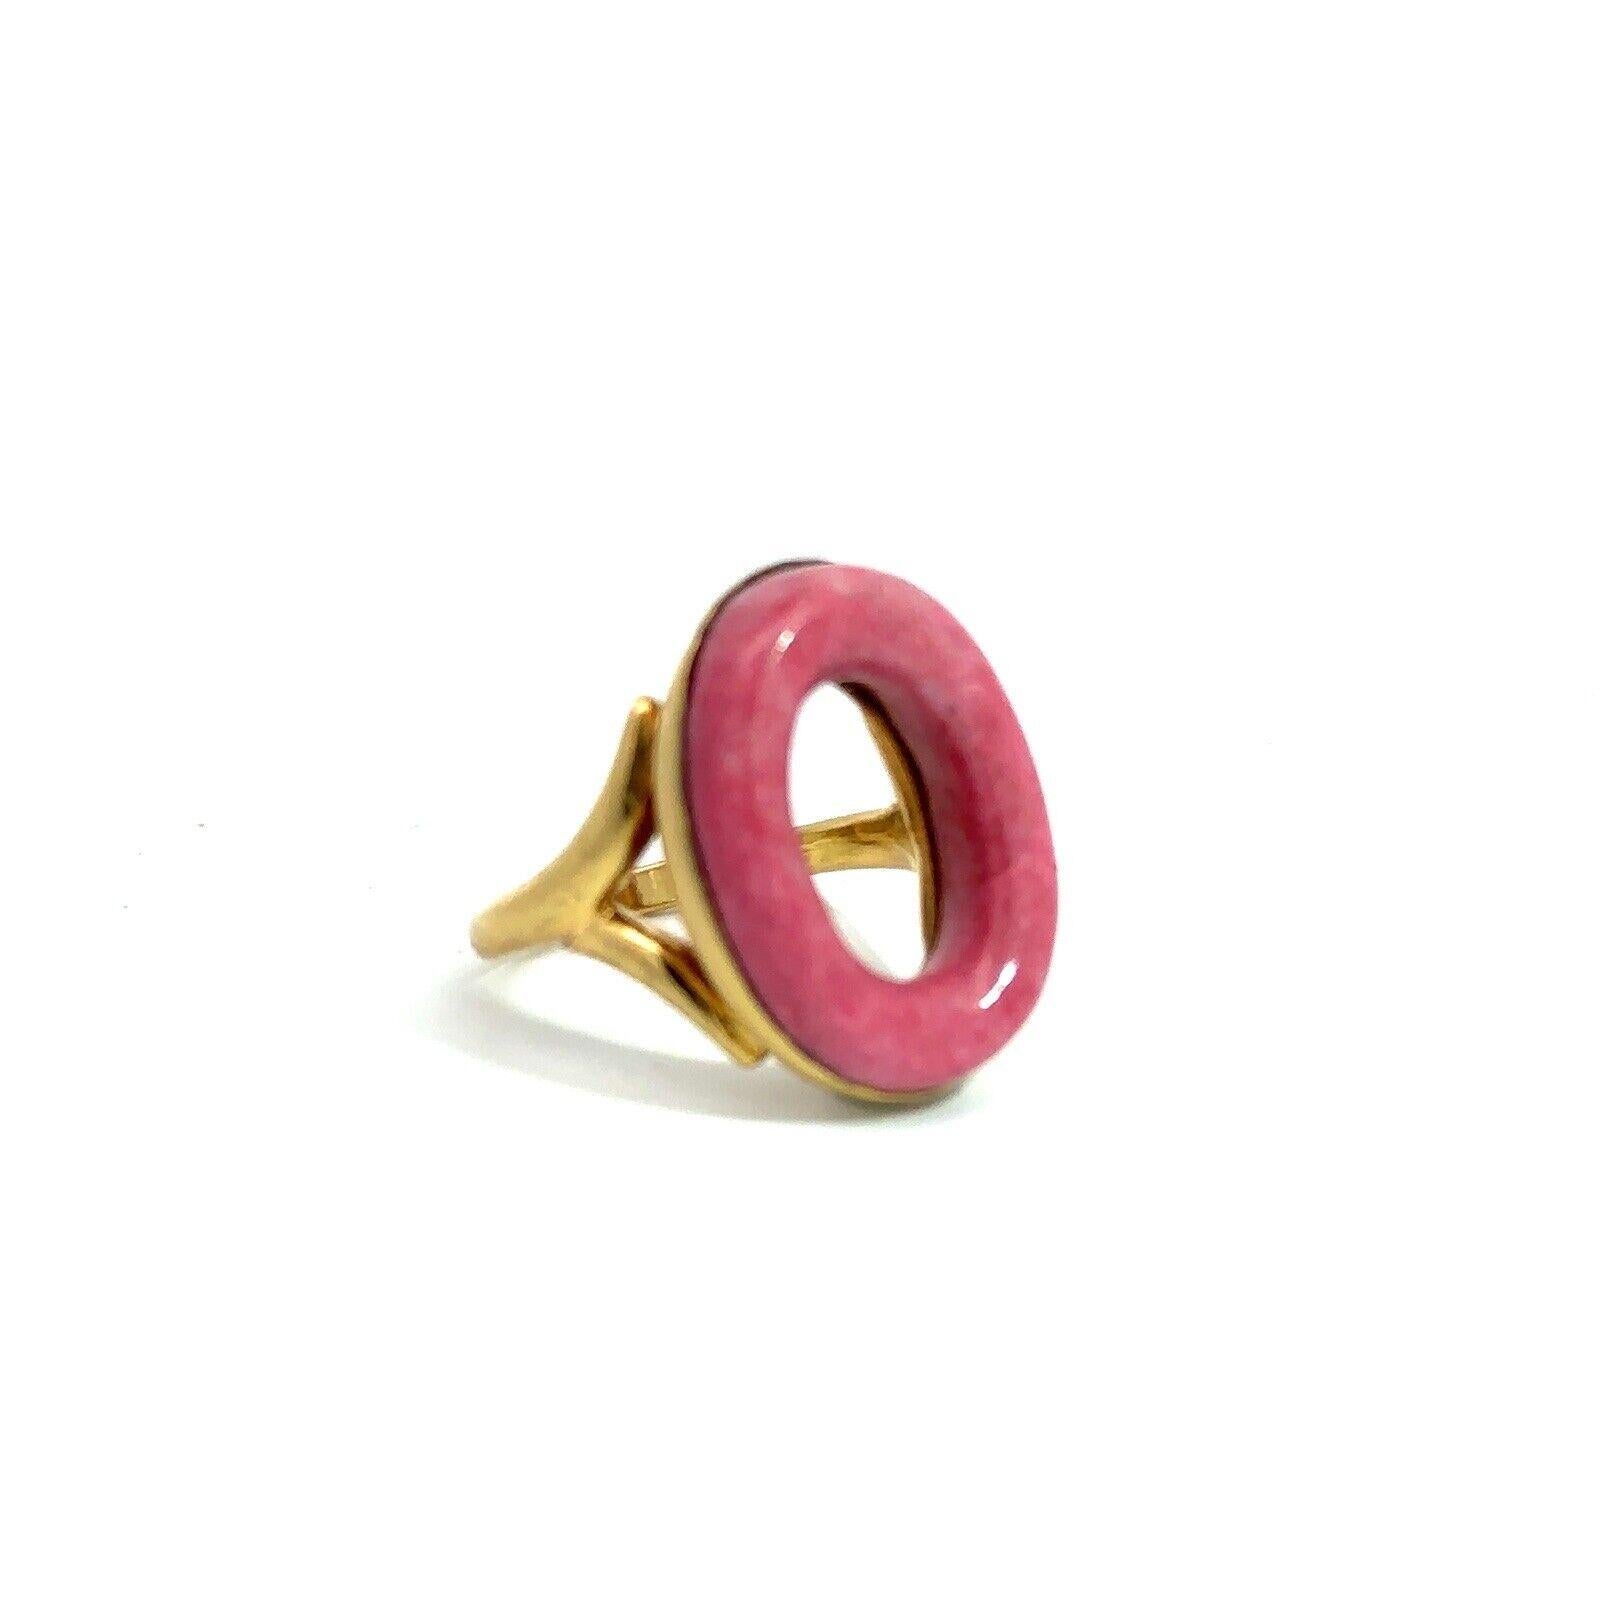 Bvlgari Italy 18k Yellow Gold & Rhodochrosite Circle Ring Circa 1970s Vintage


Here is your chance to purchase a beautiful and highly collectible designer ring.  Truly a great piece at a great price! 

Details:
Size : 7/8